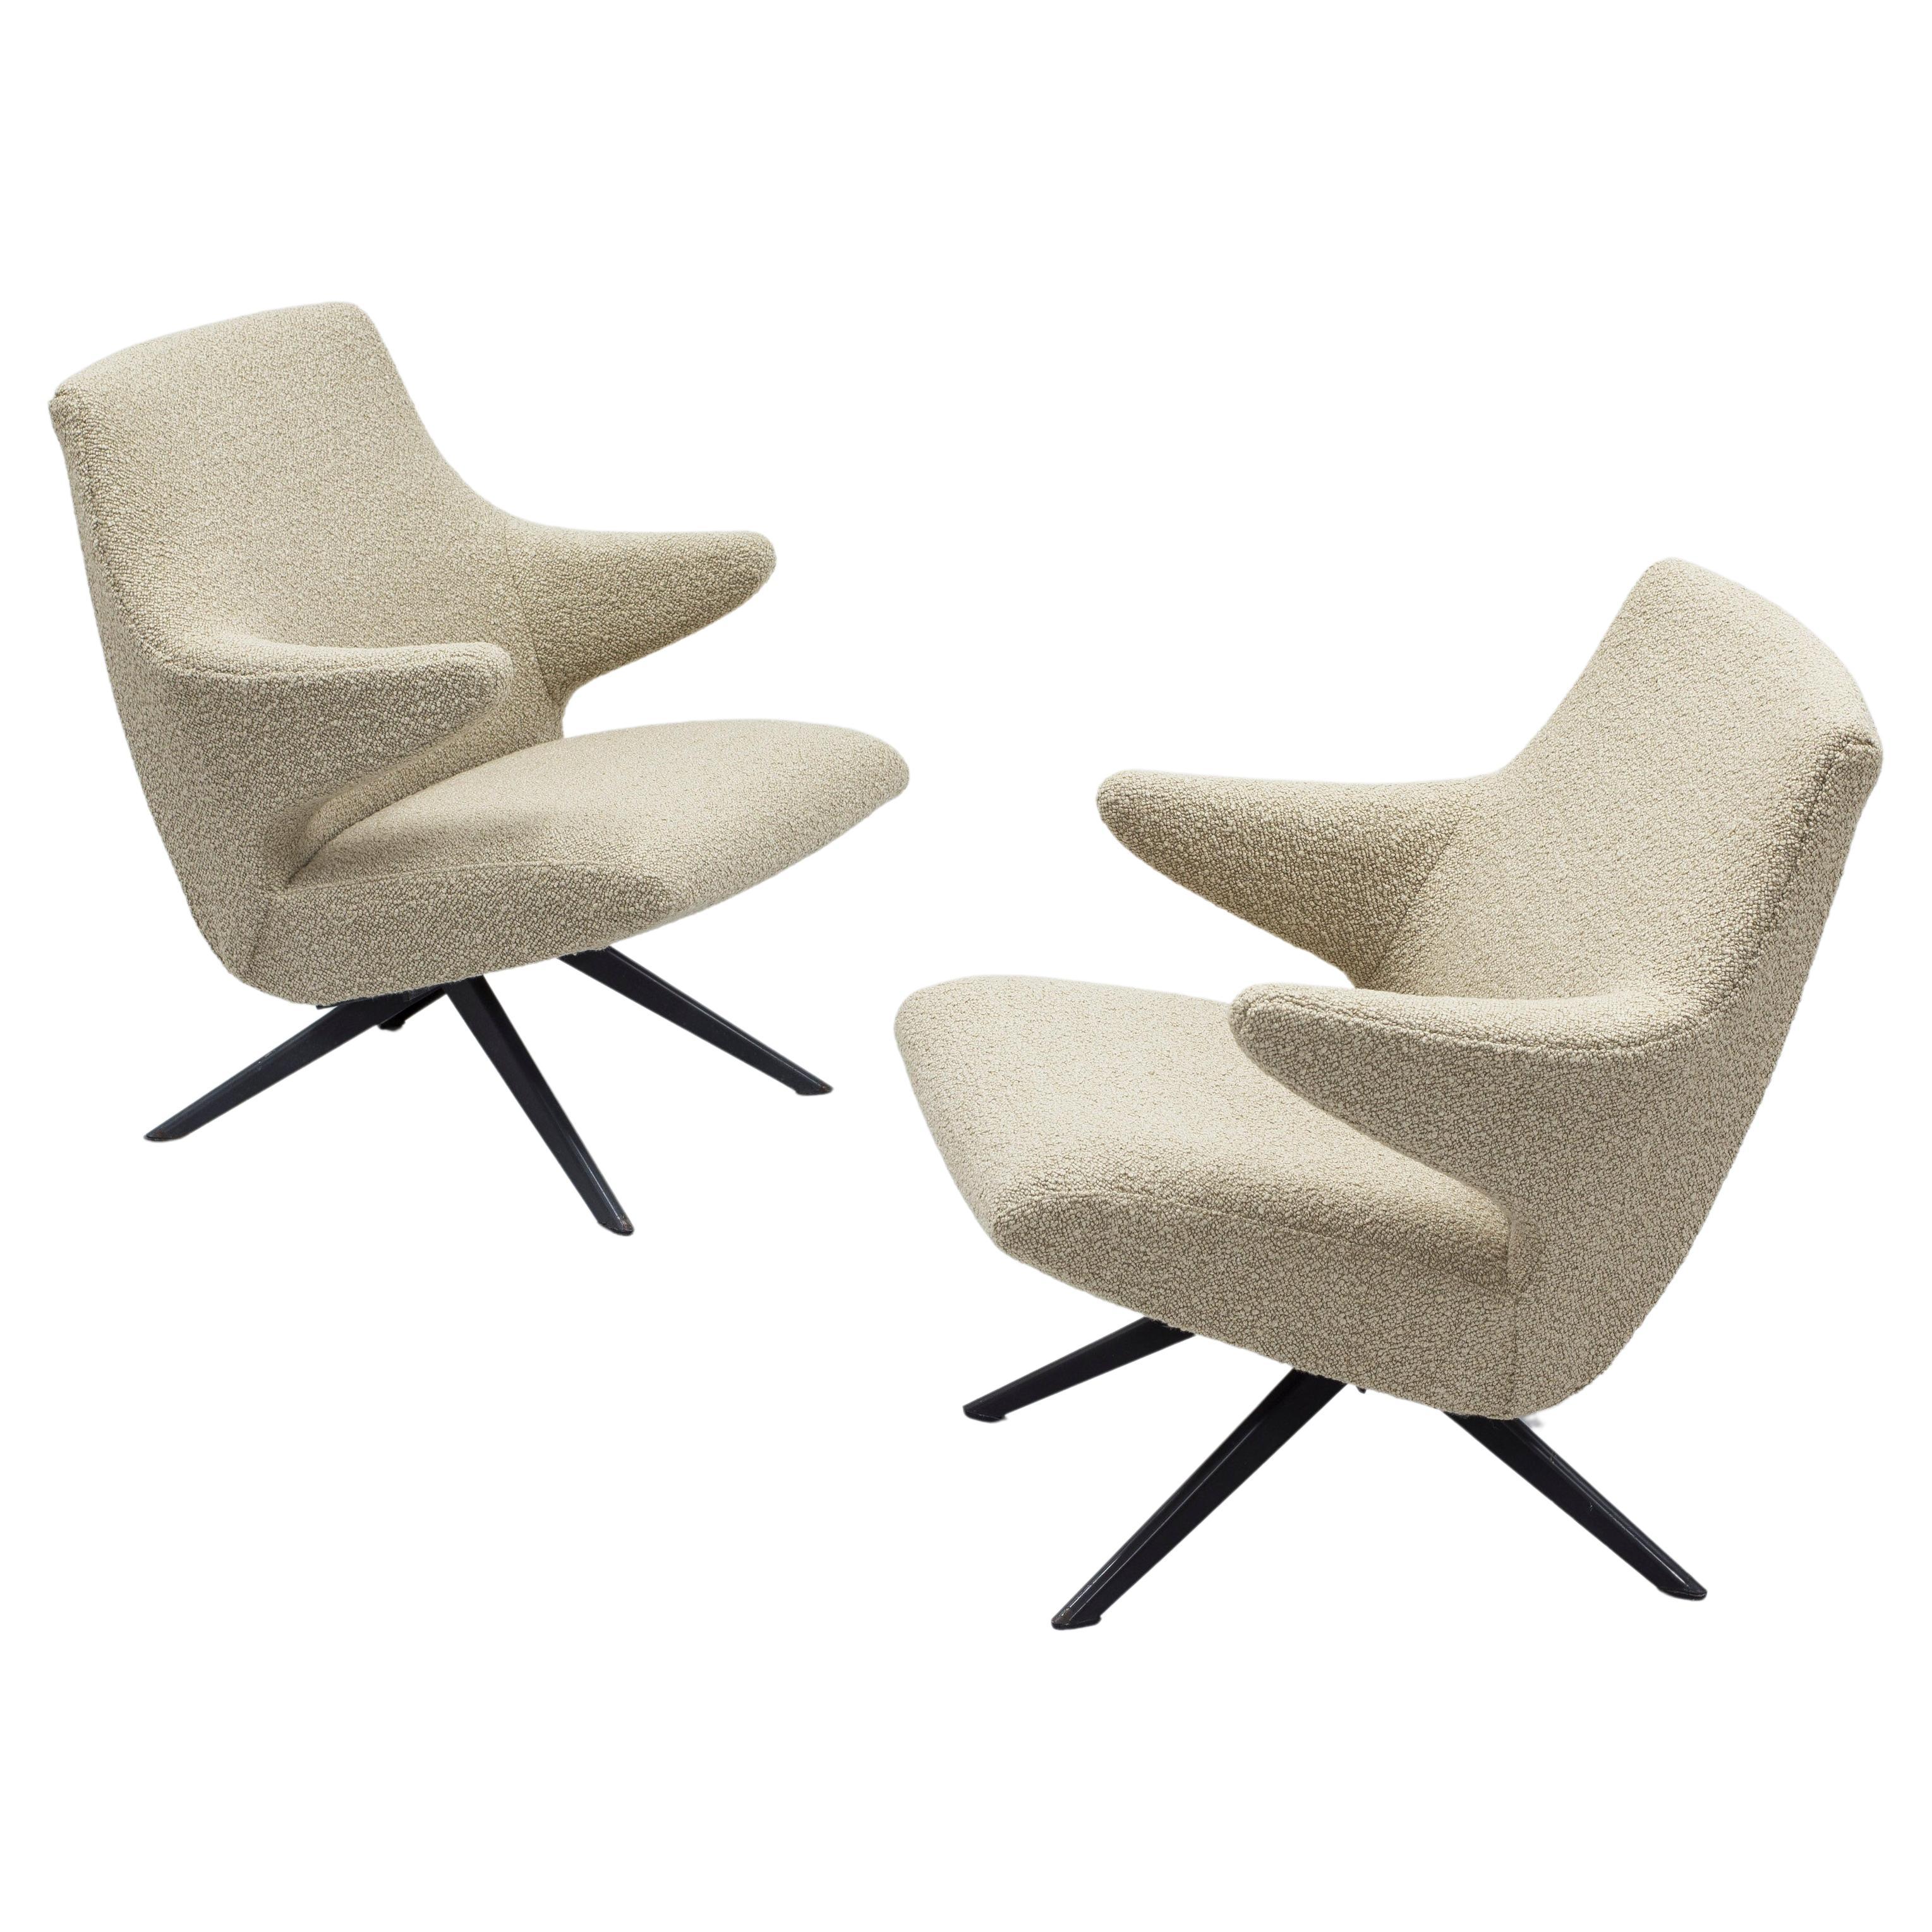 Pair of lounge chairs designed by Bengt Ruda by Nordiska Kompaniet, 1950 For Sale